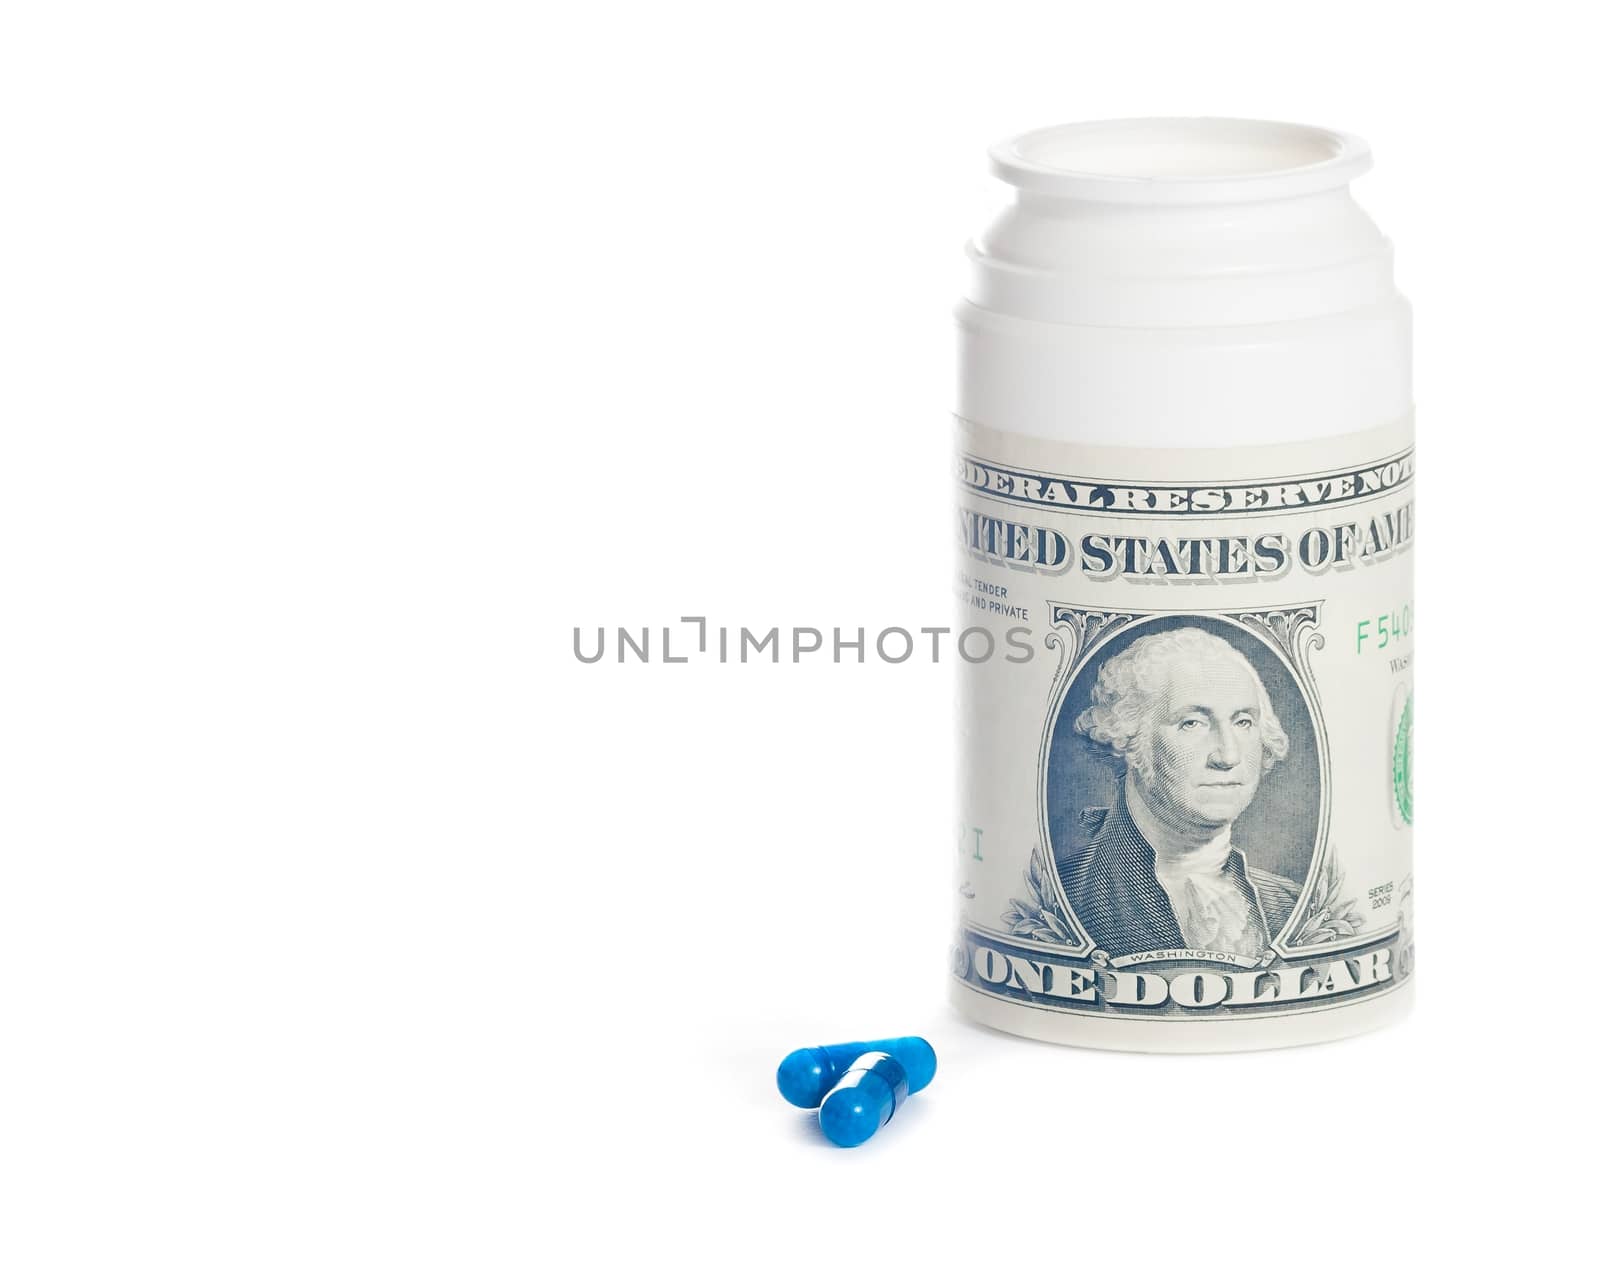 pills near dollar on pills container, cost of medical health care by donfiore